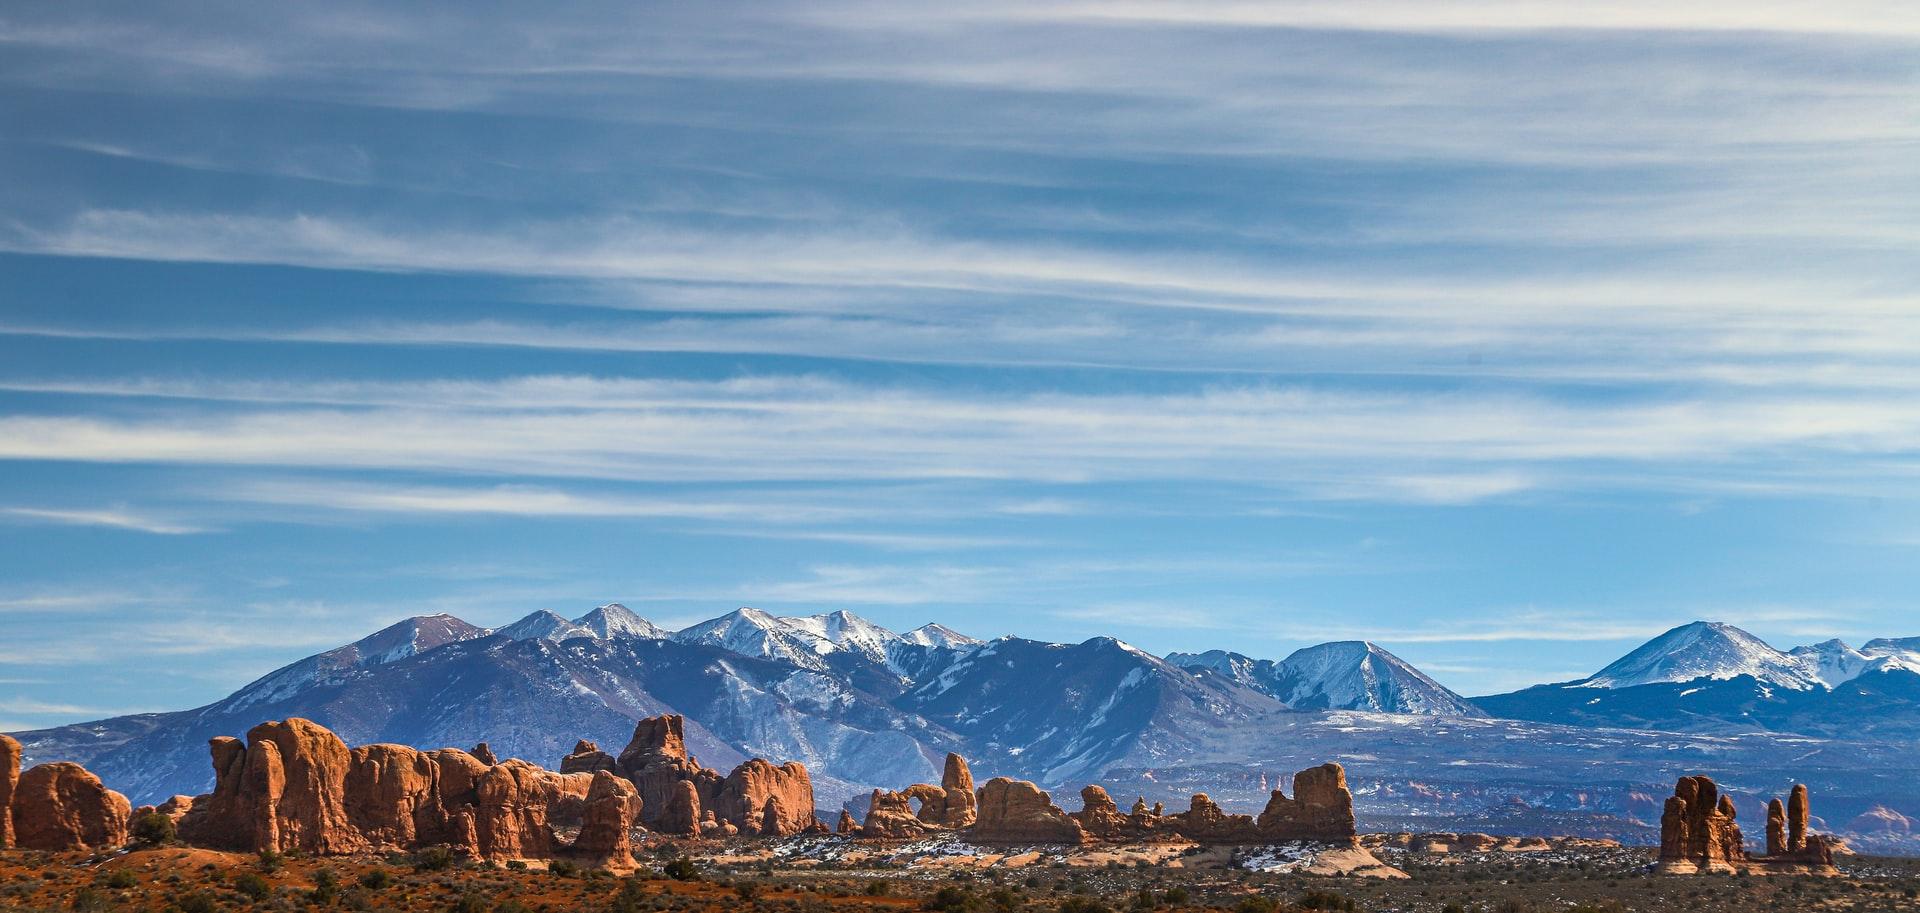 Arches National Park, Utah, USA Overlooking Mt. Waas, Mt. Peale, and South Mountain.